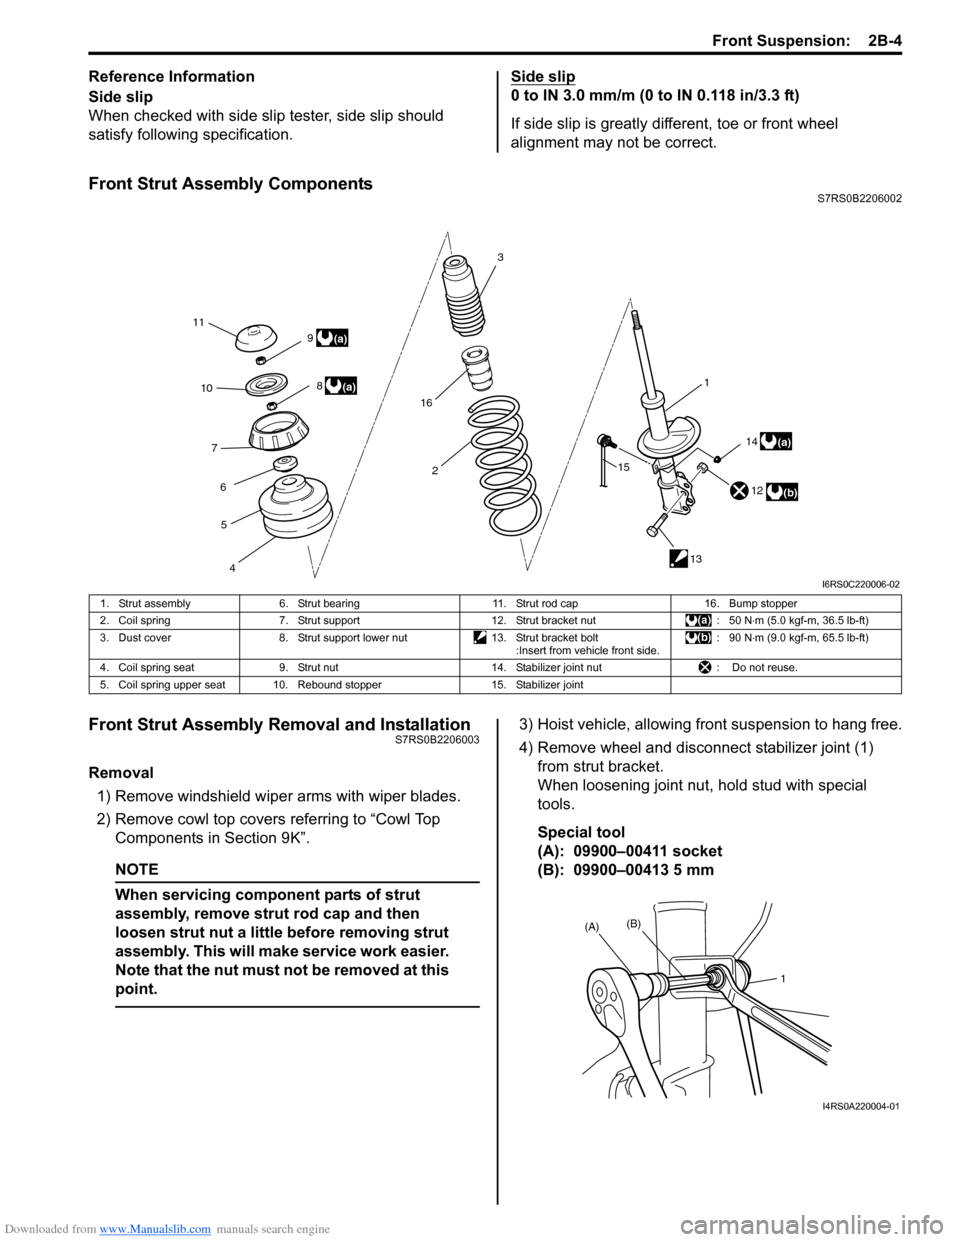 SUZUKI SWIFT 2006 2.G Service Workshop Manual Downloaded from www.Manualslib.com manuals search engine Front Suspension:  2B-4
Reference Information
Side slip
When checked with side slip tester, side slip should 
satisfy following specification.S